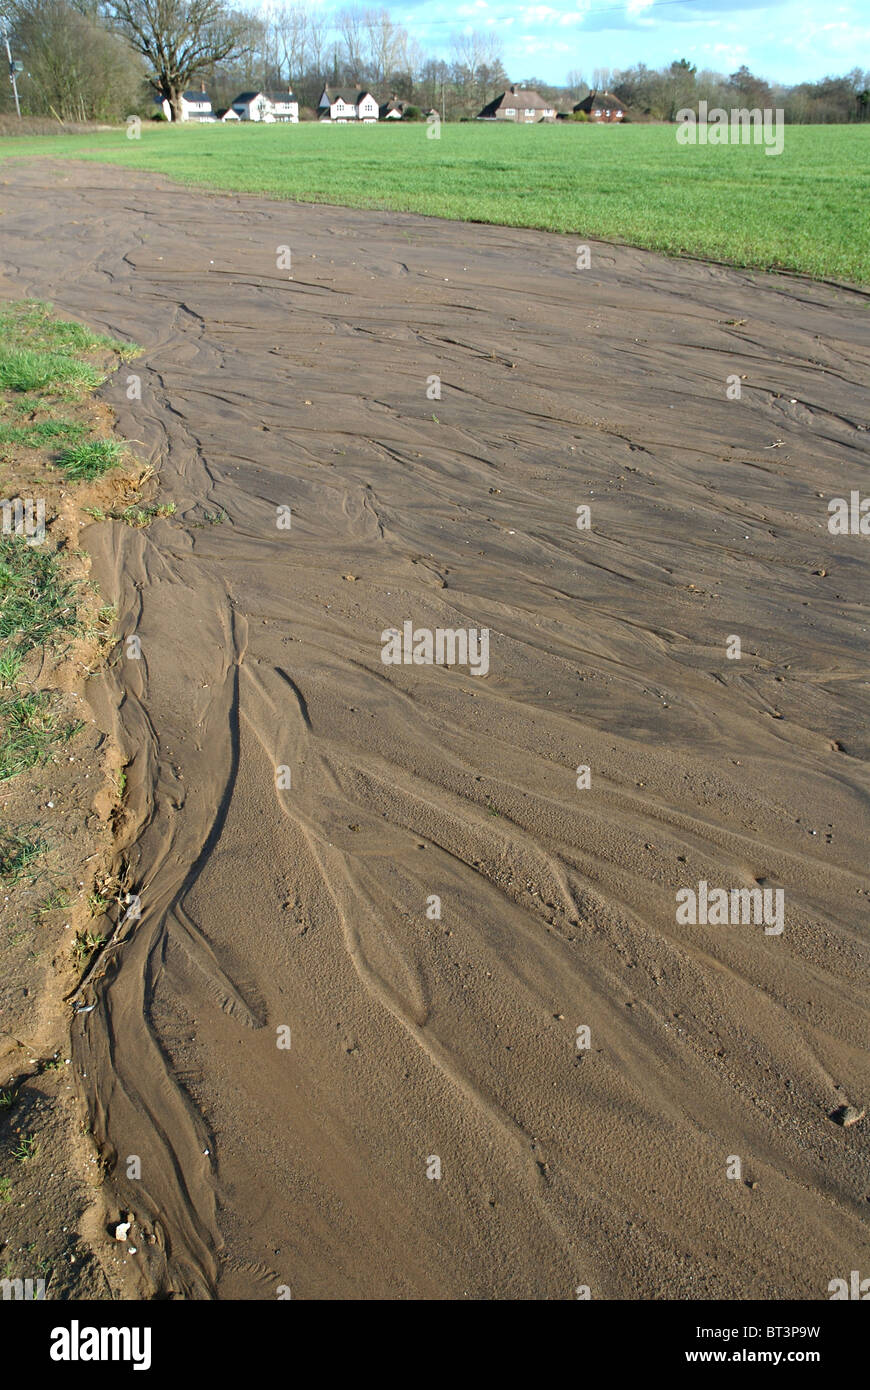 Modern farming methods with intensive irrigation causing soil erosion in Sussex Stock Photo